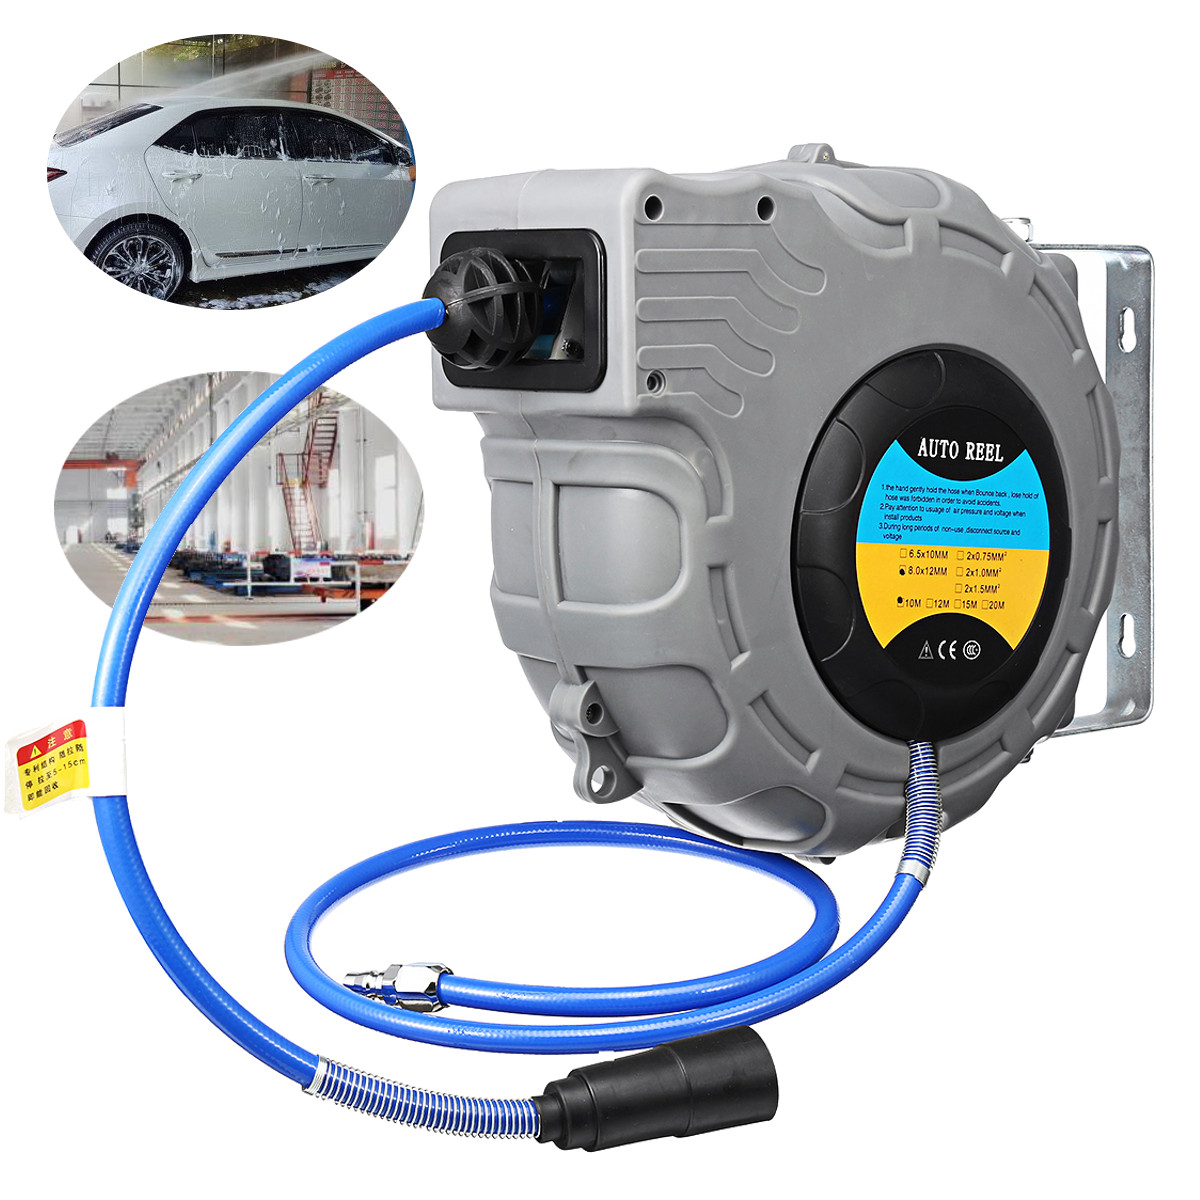 Wall-Mounted-Automatic-Retractable-Garden-Hose-Pipe-Reel-Water-Car-Cleaning-Tool-1500193